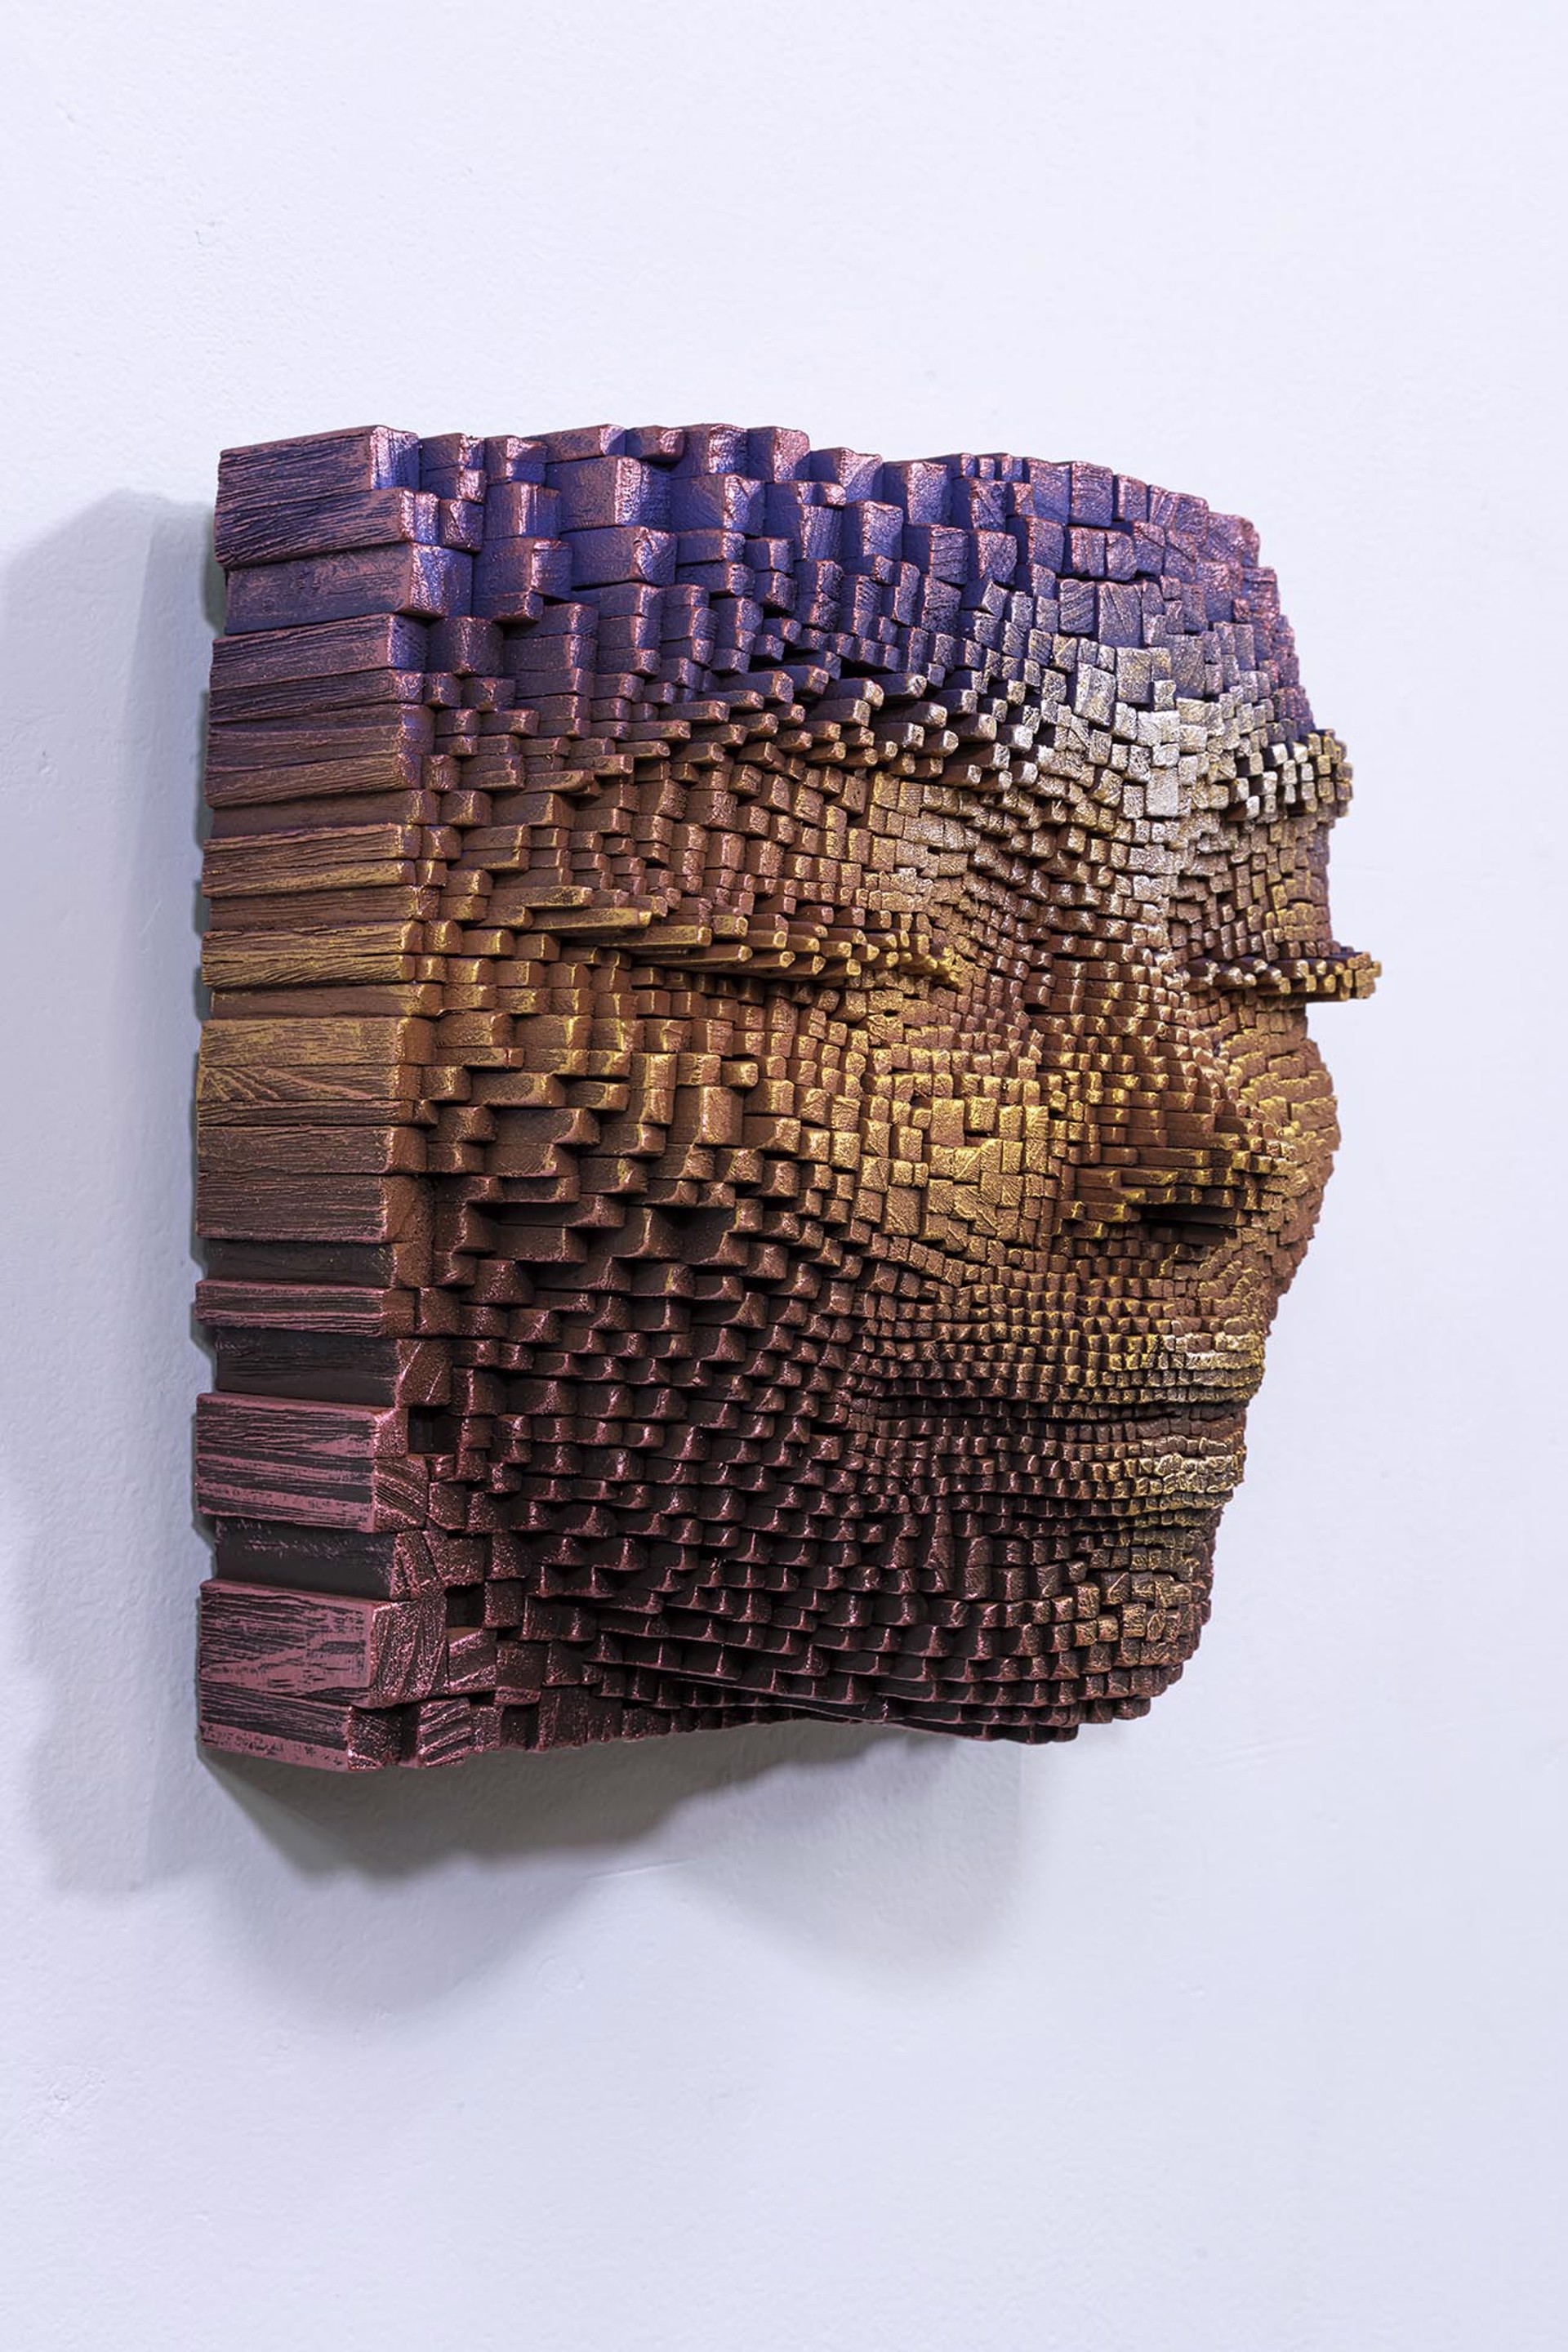 Mask #282 by Gil Bruvel